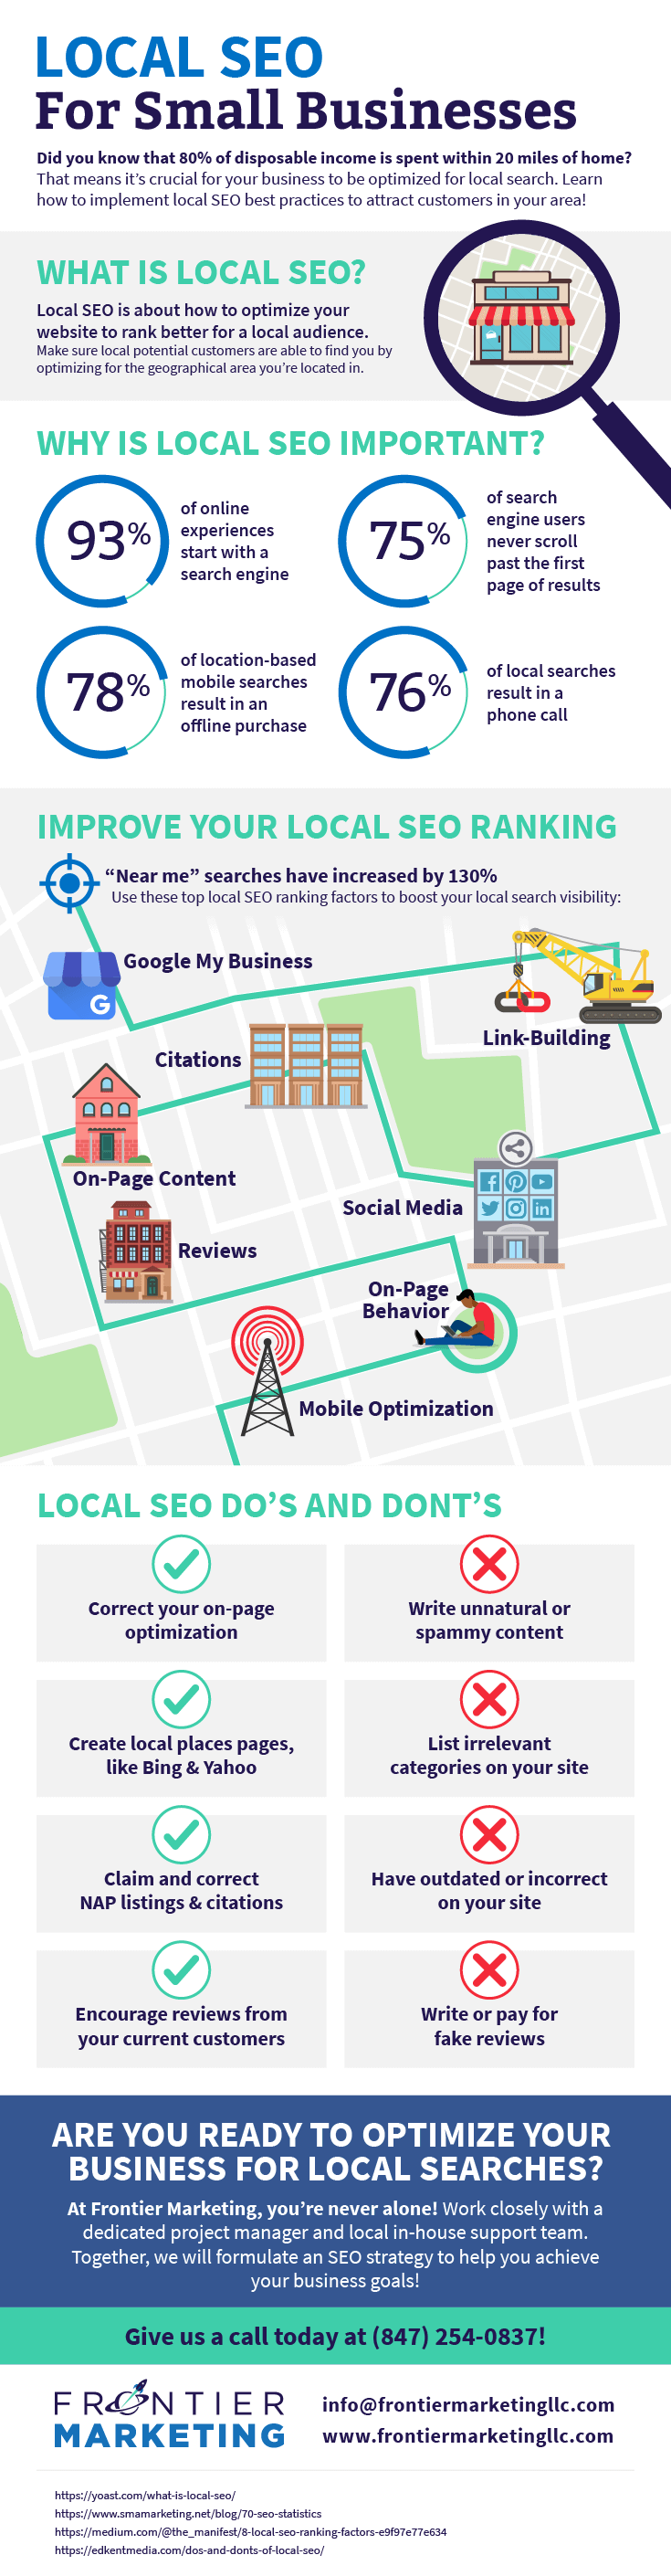 An infographic featuring the top local SEO ranking factors.